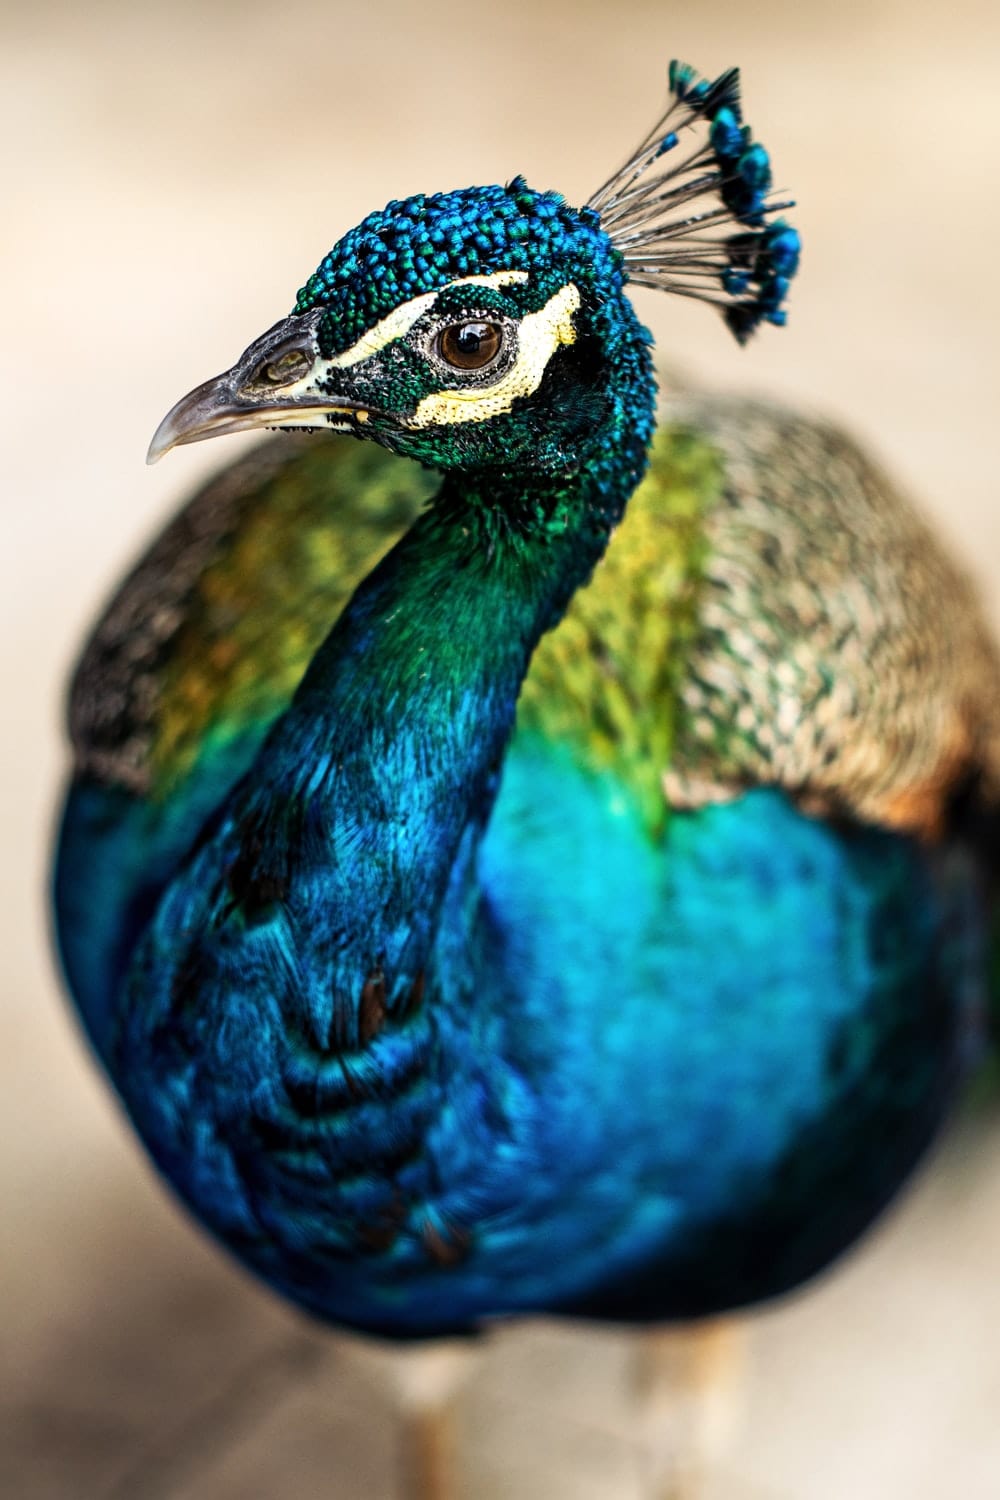 Cross Stitch | Peacock - Blue Green And Brown Peacock - Cross Stitched